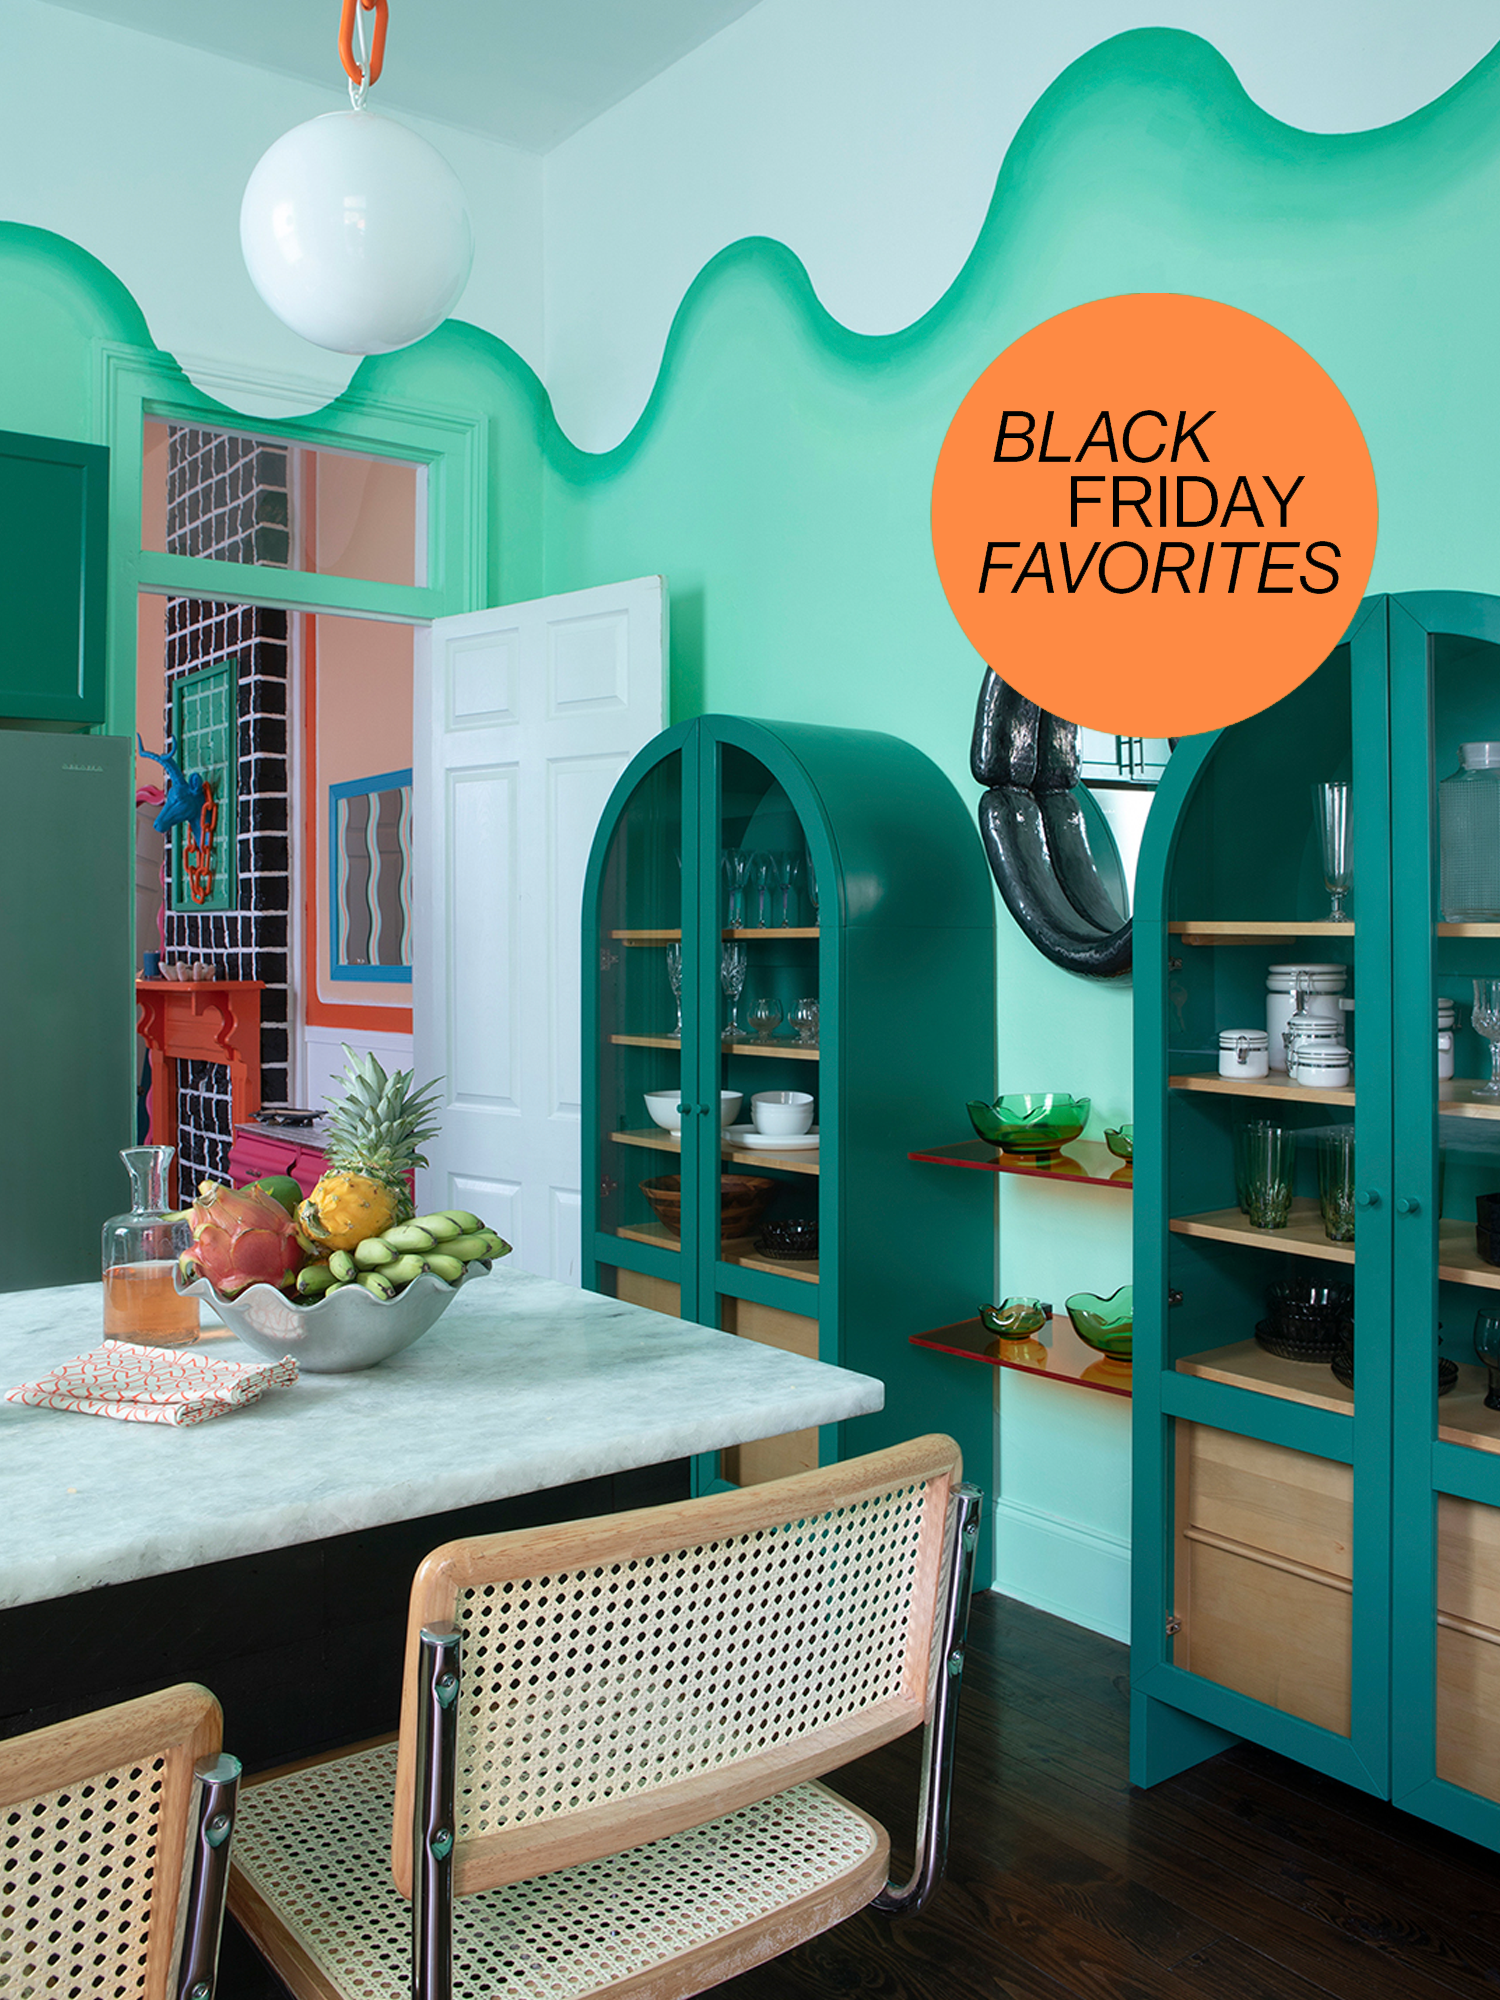 two green storage cabinets connected by open wood shelves in kitschy kitchen and dining room